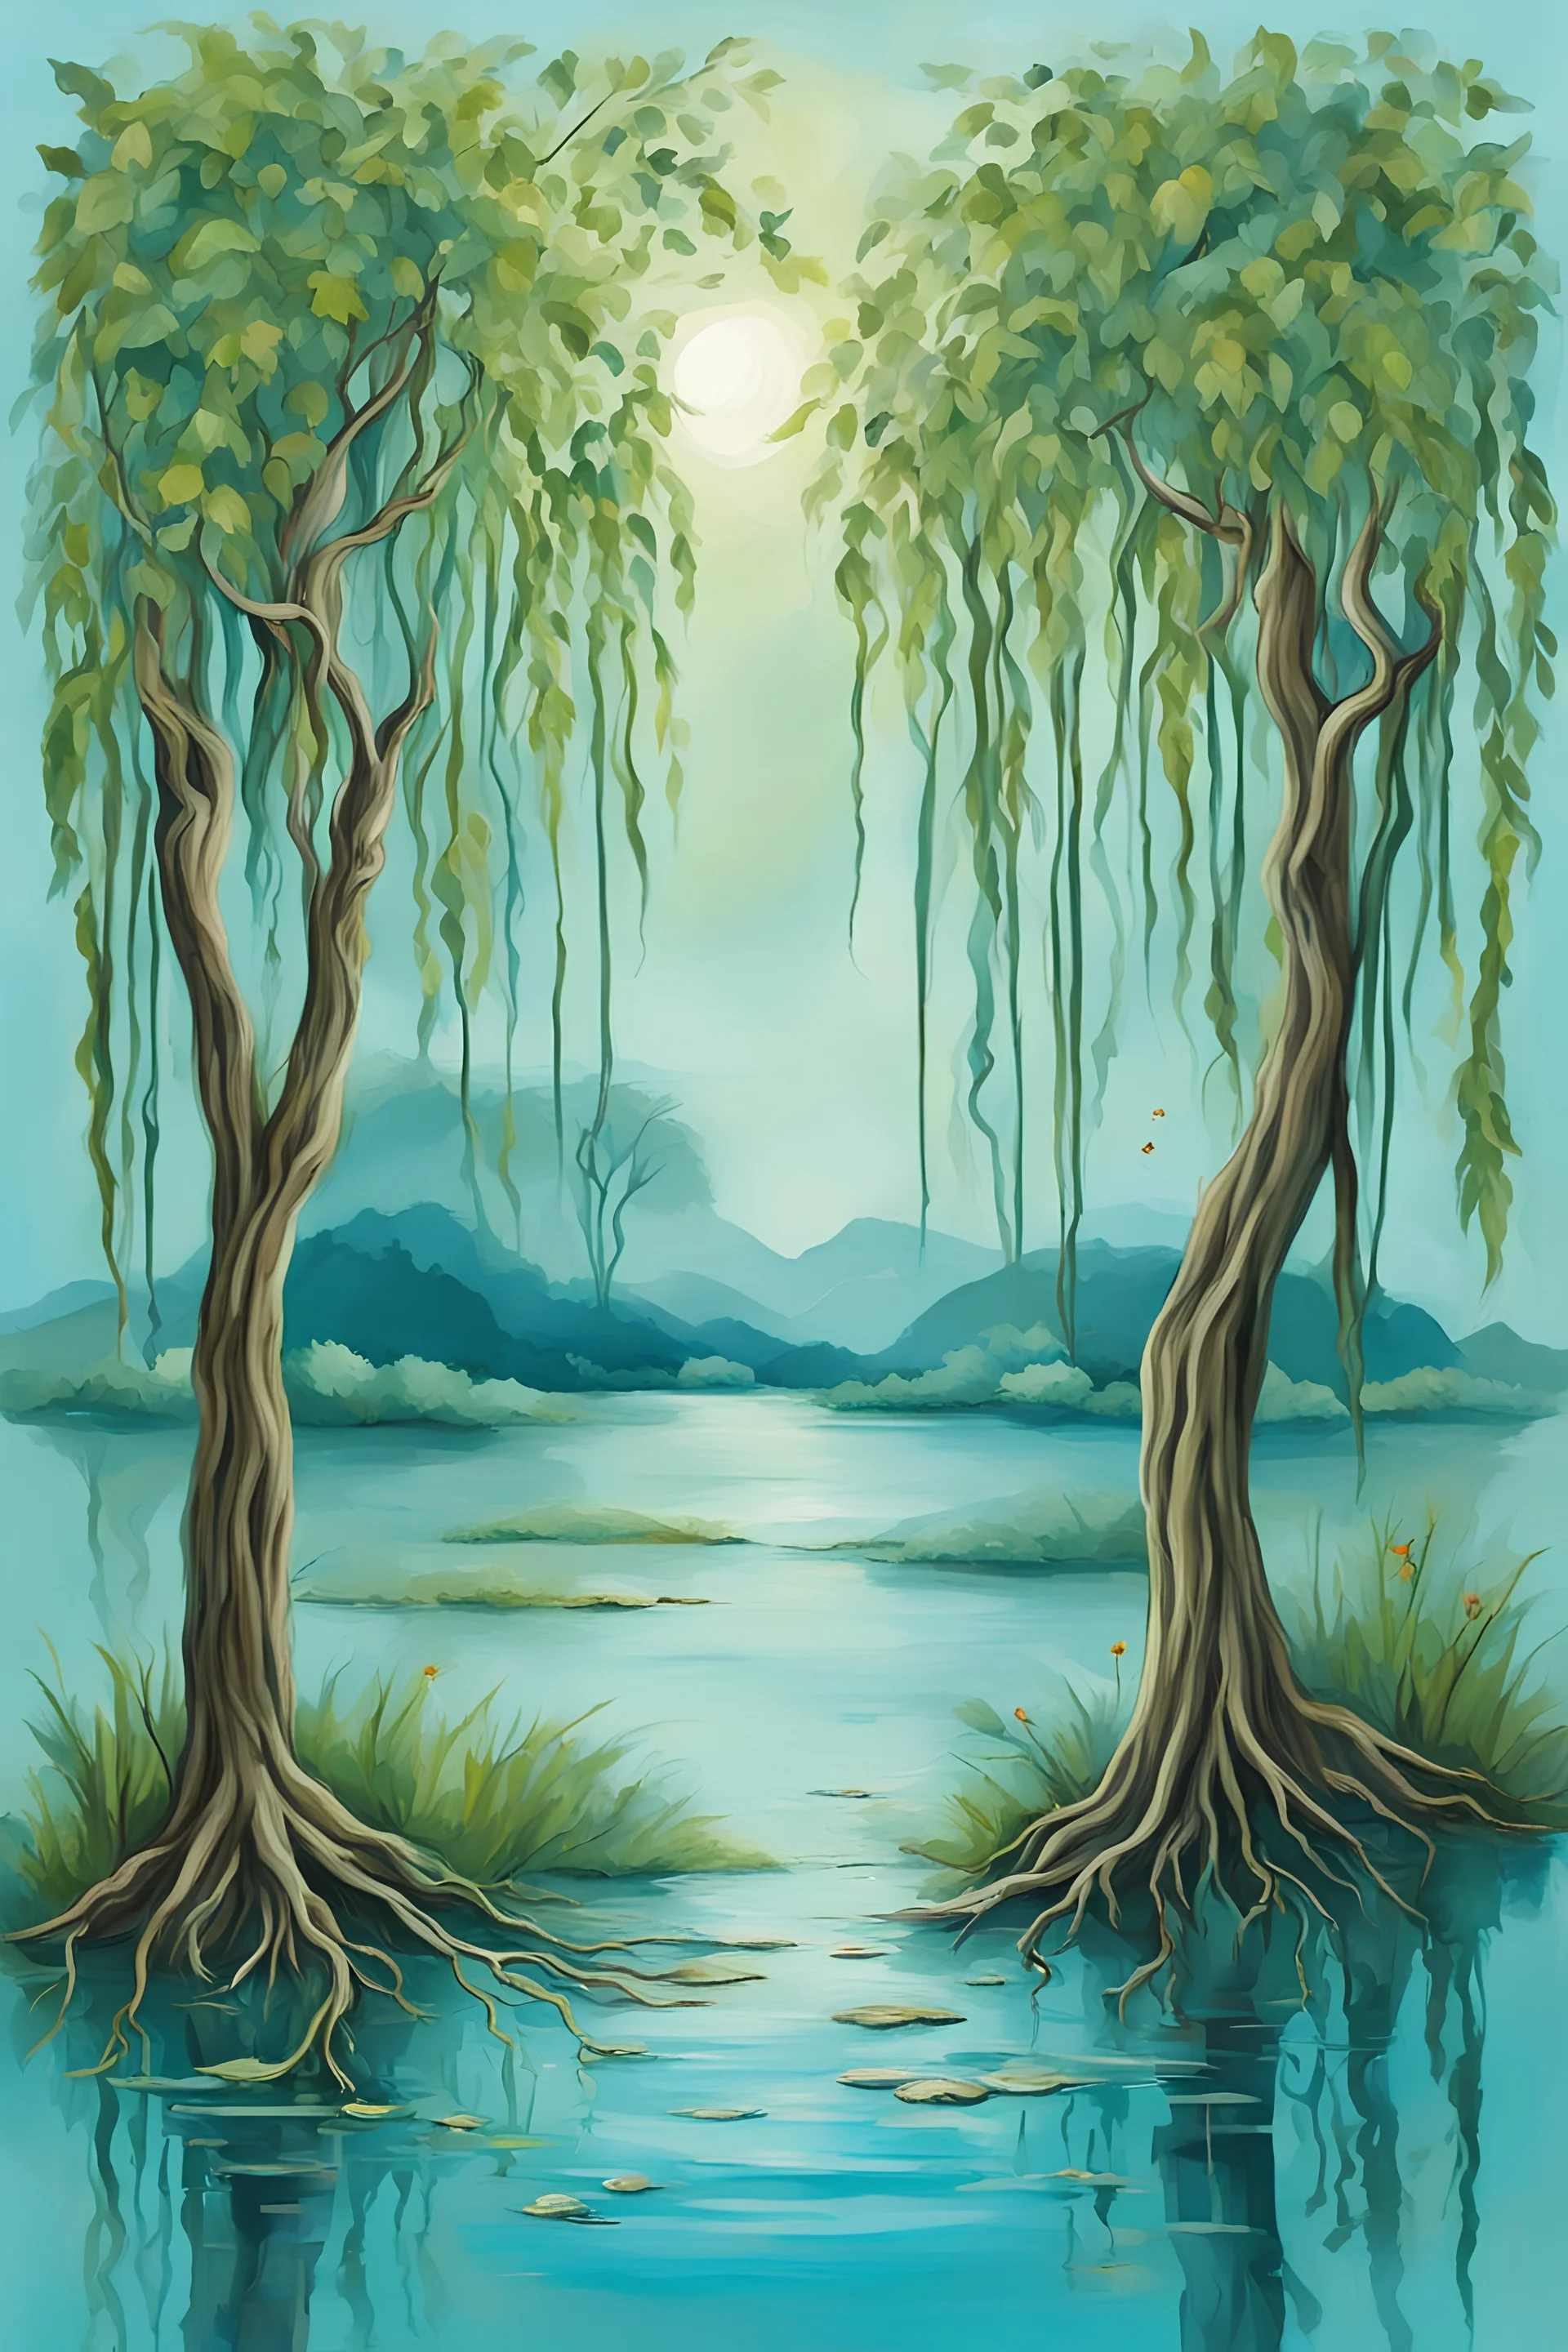 Panorama composition, green theme, weeping willows, Gangnam impression, bohemian theme handmade decorative paintings, creative composition, stunning design, master work, light blue background